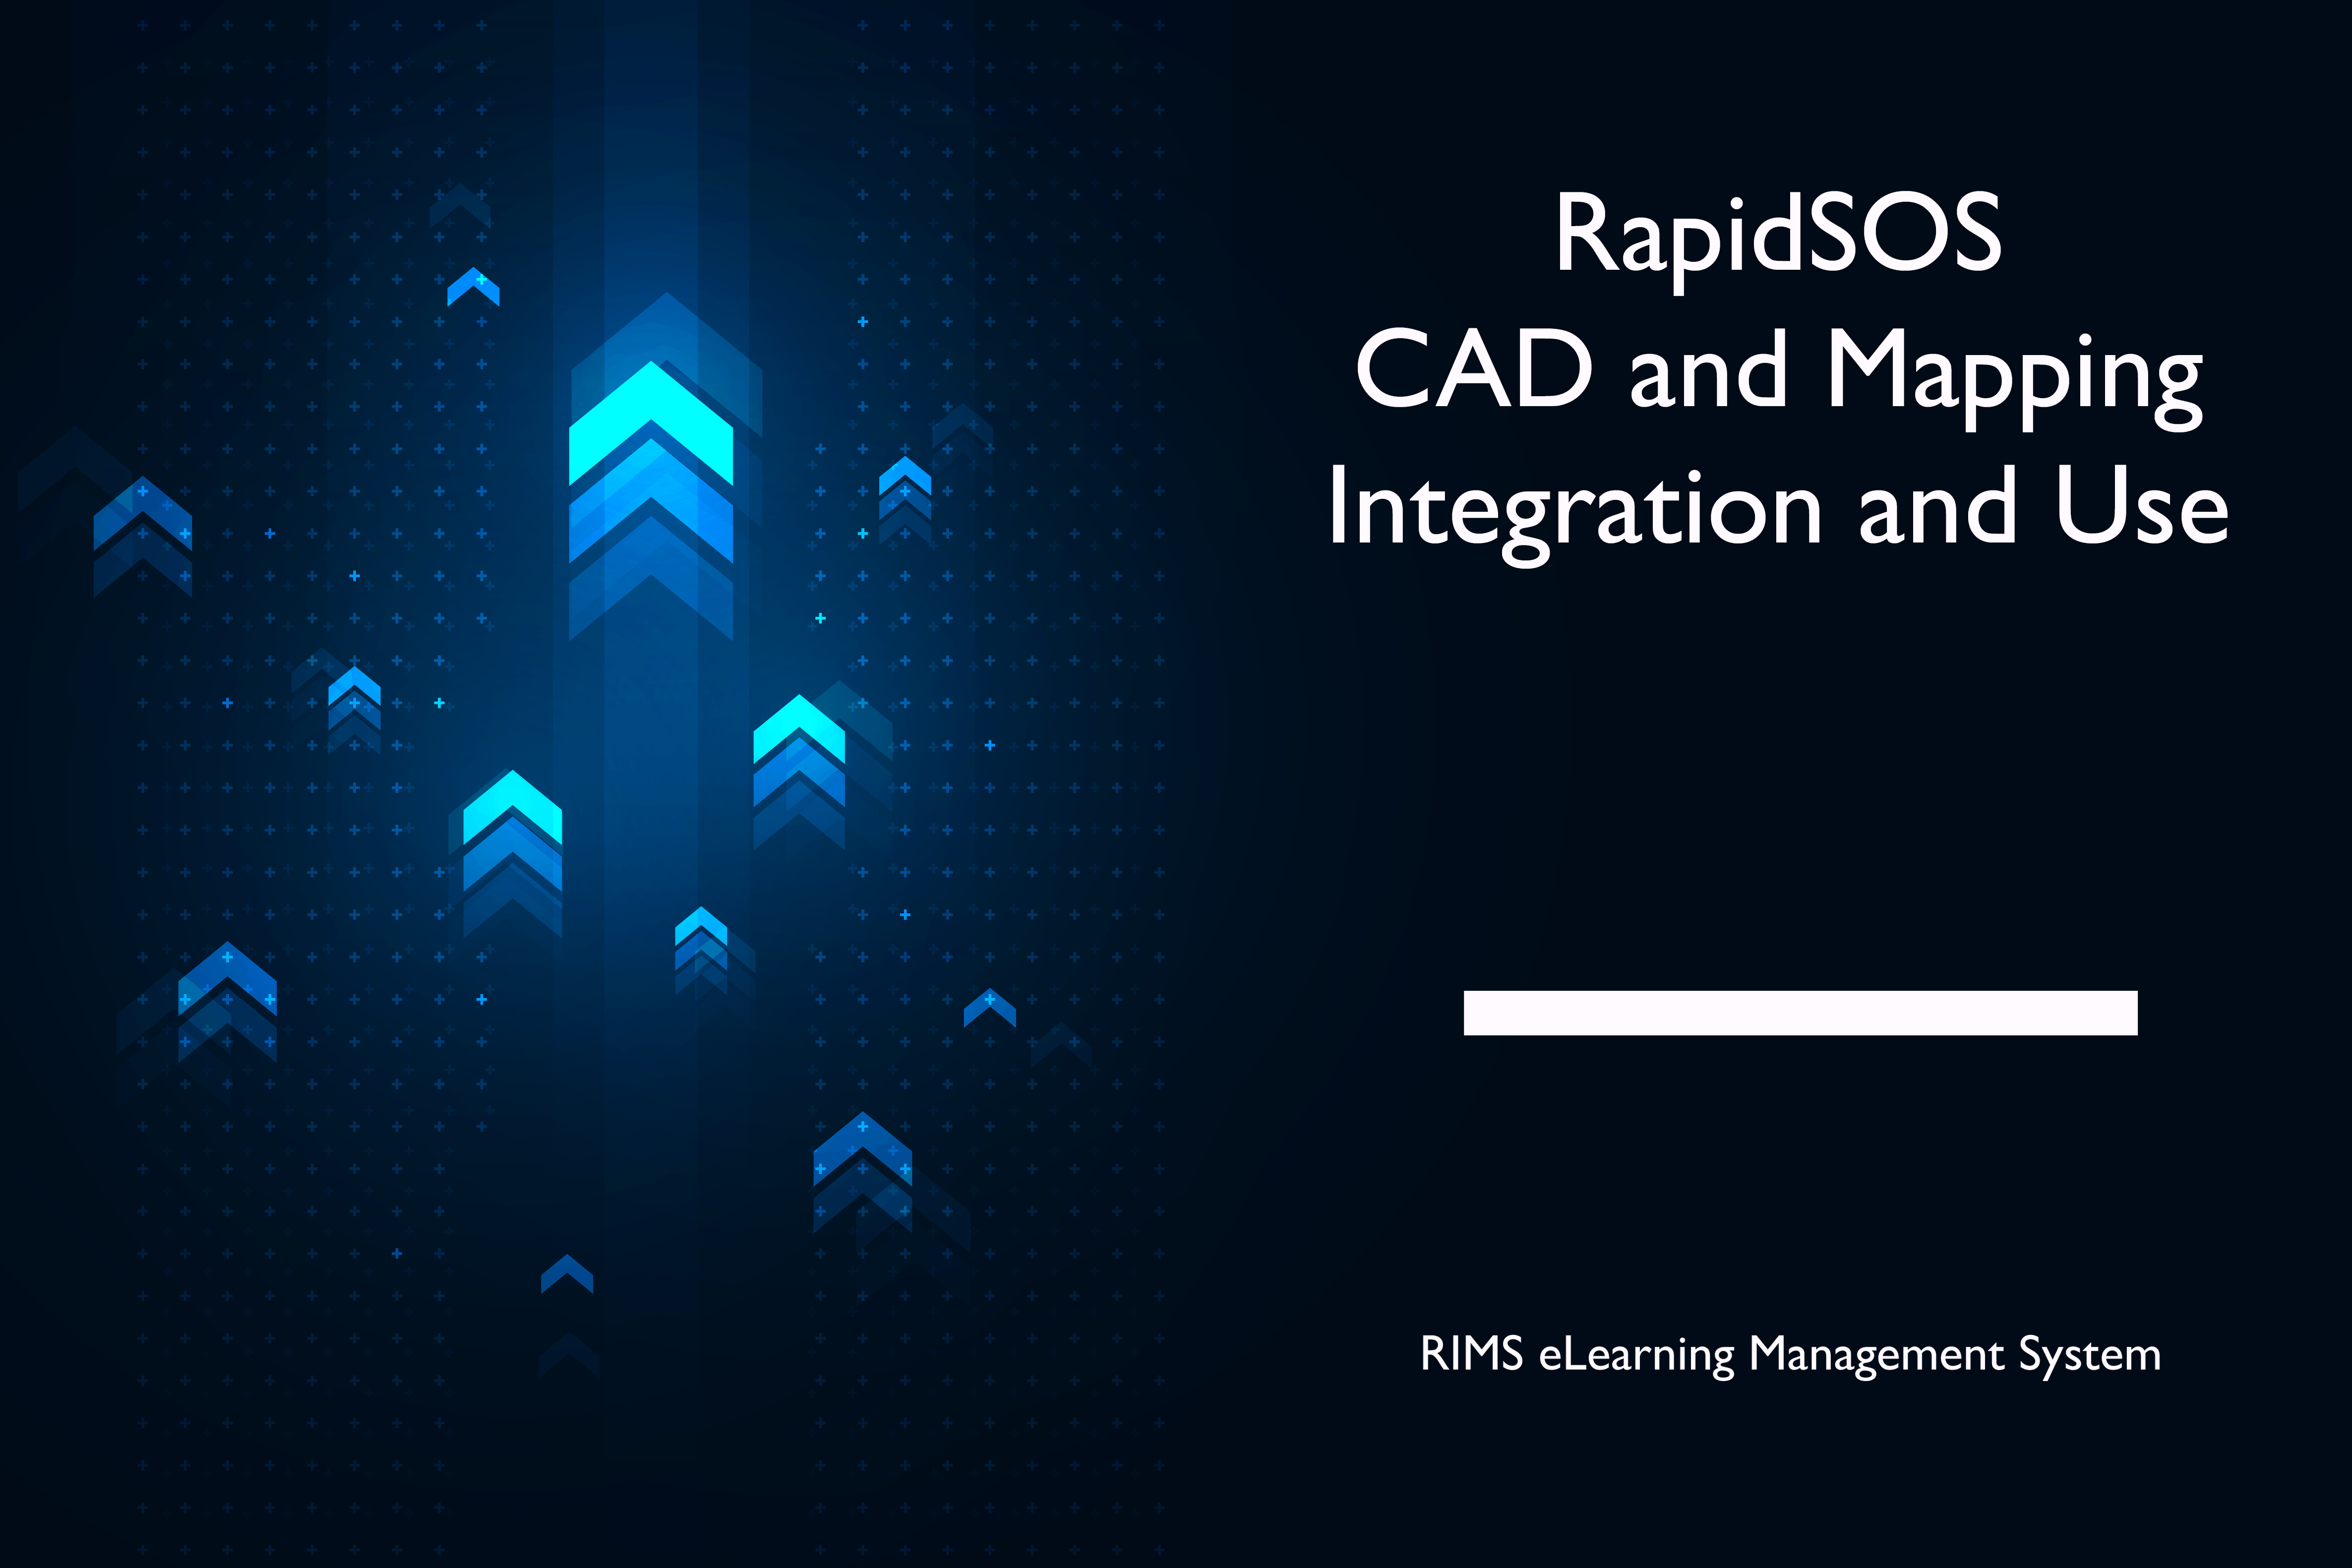 RapidSOS CAD and Mapping Integration